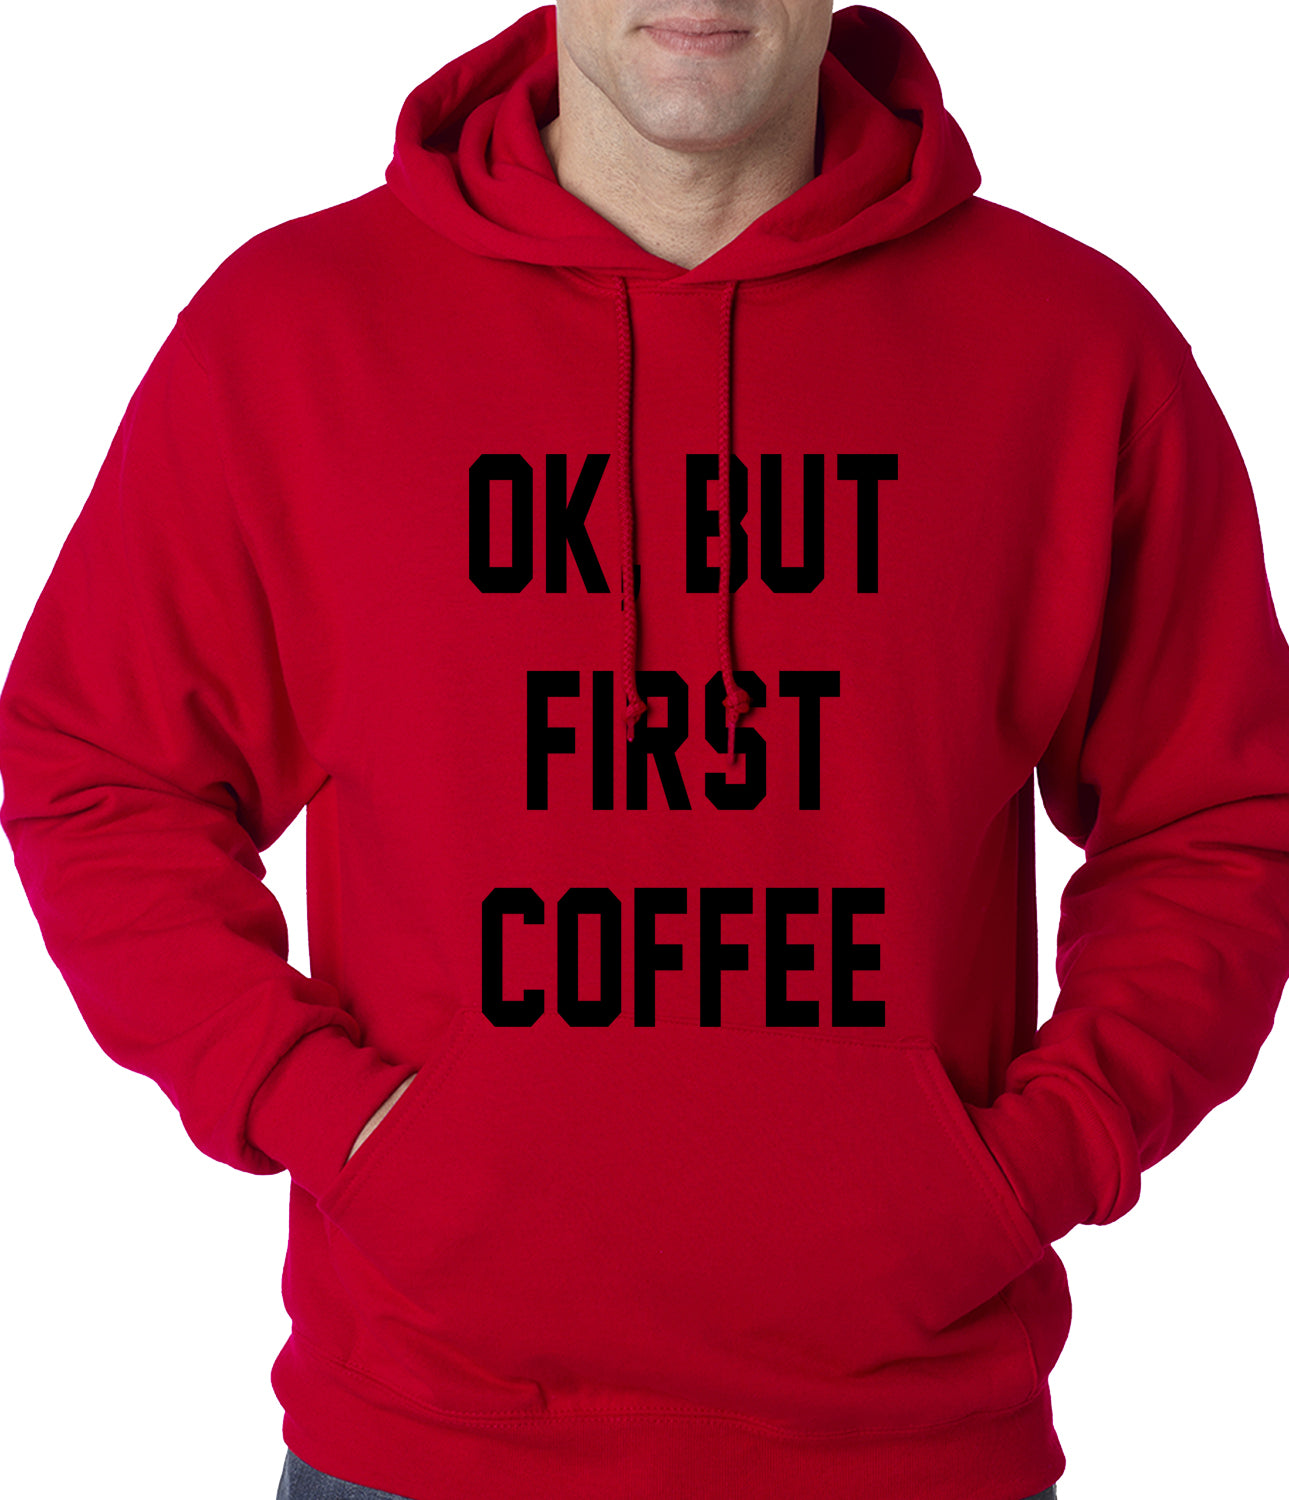 Ok, But First Coffee Adult Hoodie